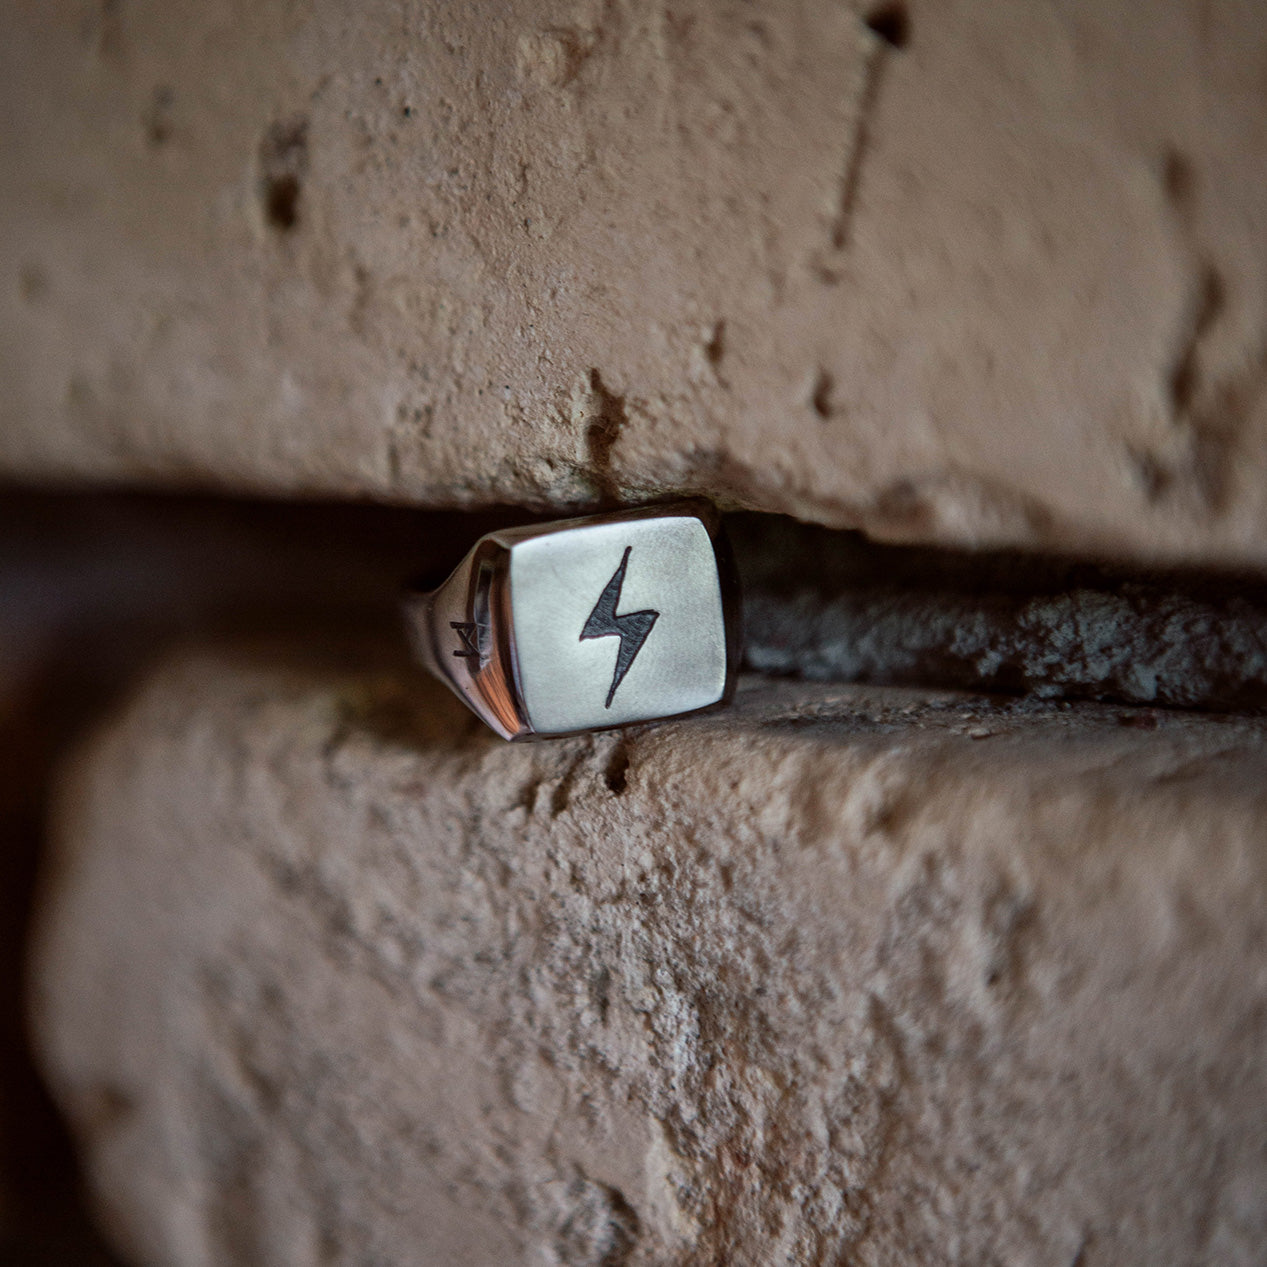 Titanium signet ring with an engraved lightning bolt. The ring is held between two bricks.